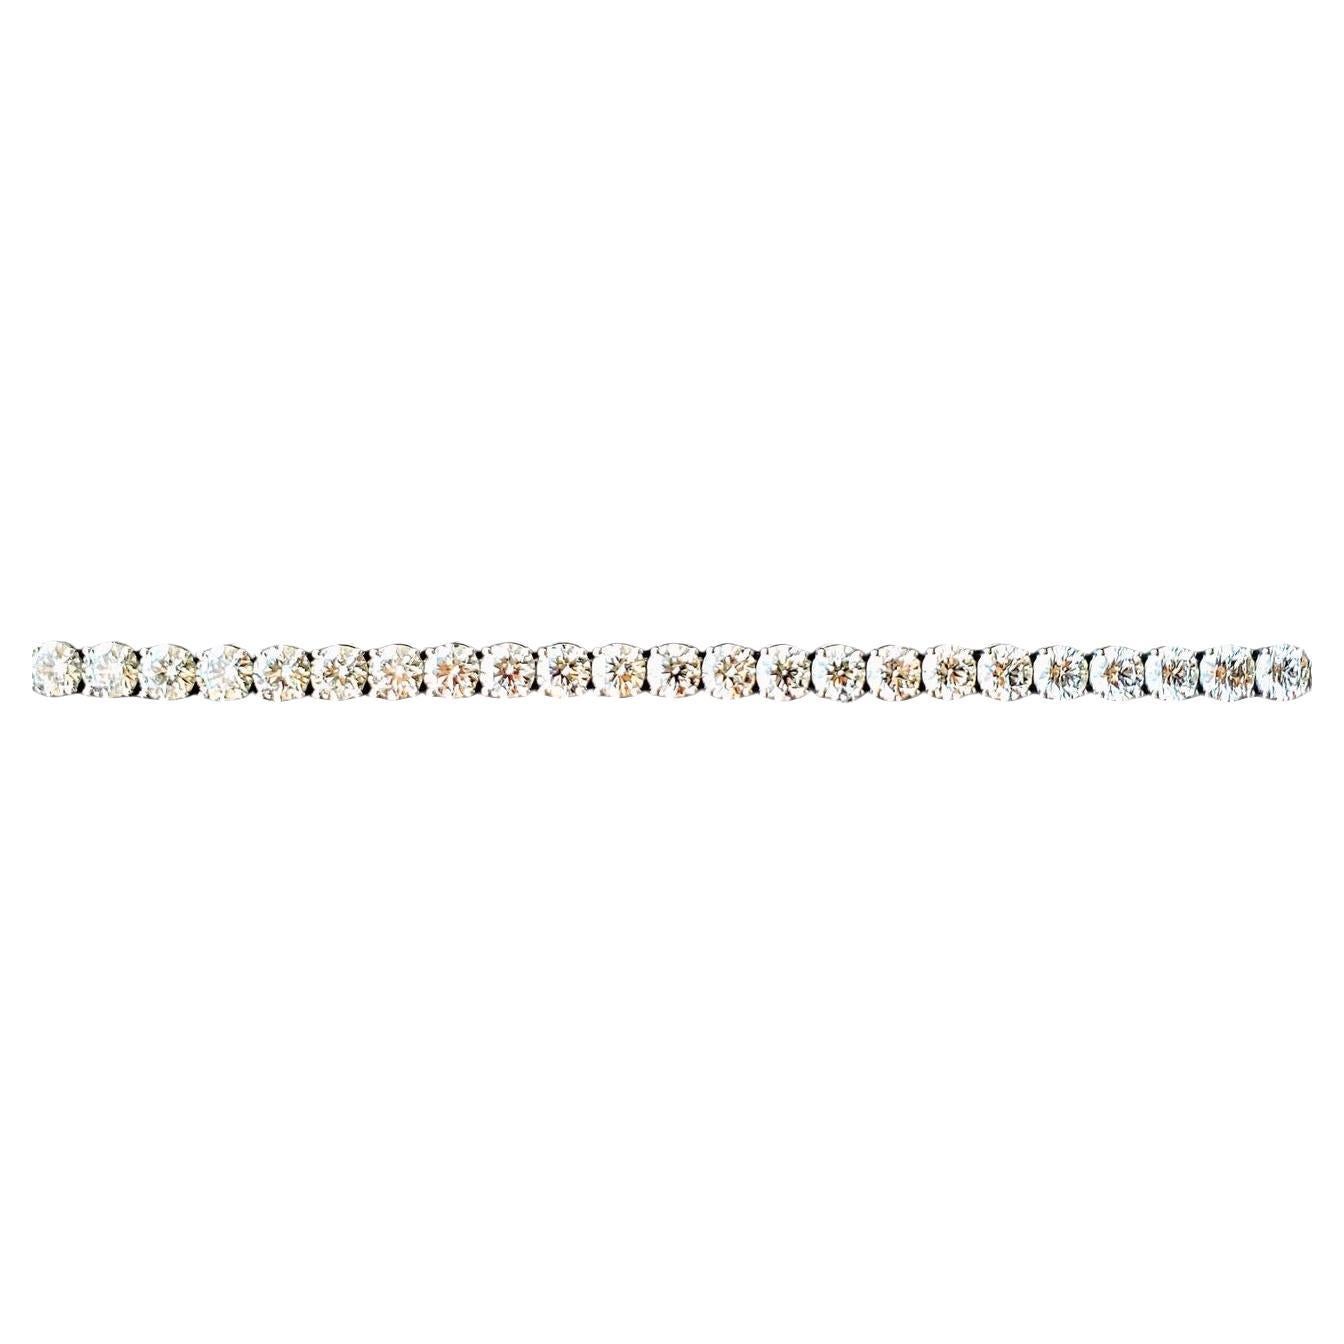 Introducing our exquisite Tennis Bracelet, a true symbol of luxury and elegance. Crafted in luxurious 18kt white gold, this stunning piece features 29 GIA-certified diamonds totaling 24 carats. Each diamond, ranging from 0.80 to 0.85 carats and